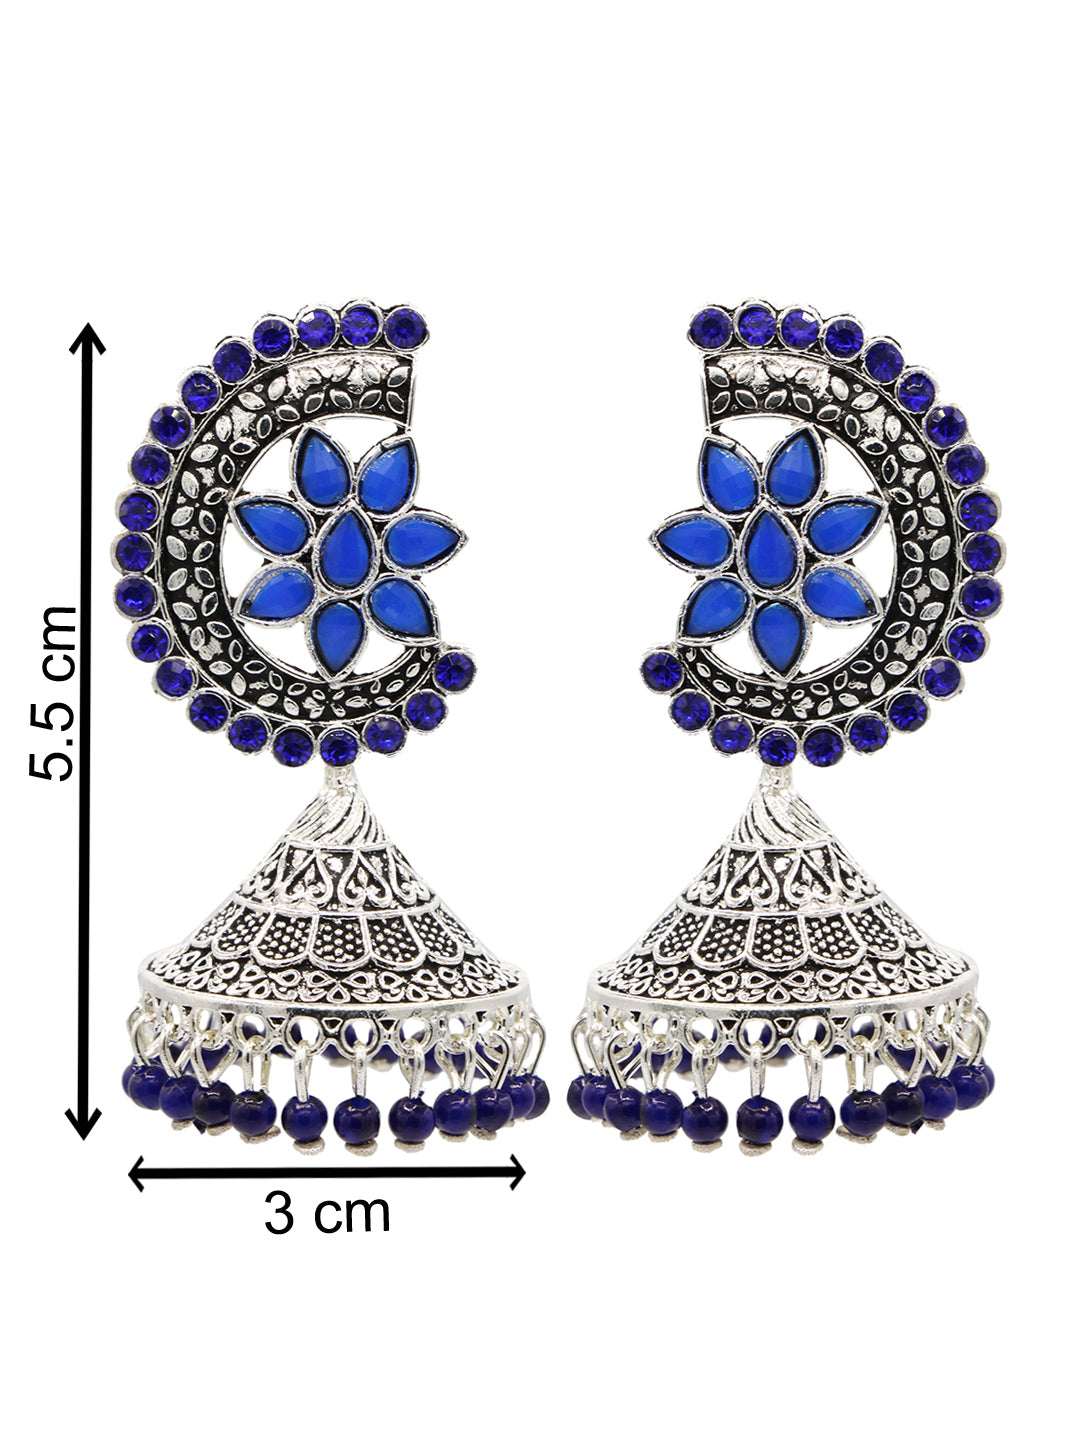 Silver-Plated Blue Stone Studded Flower Shaped Jhumkas Earrings